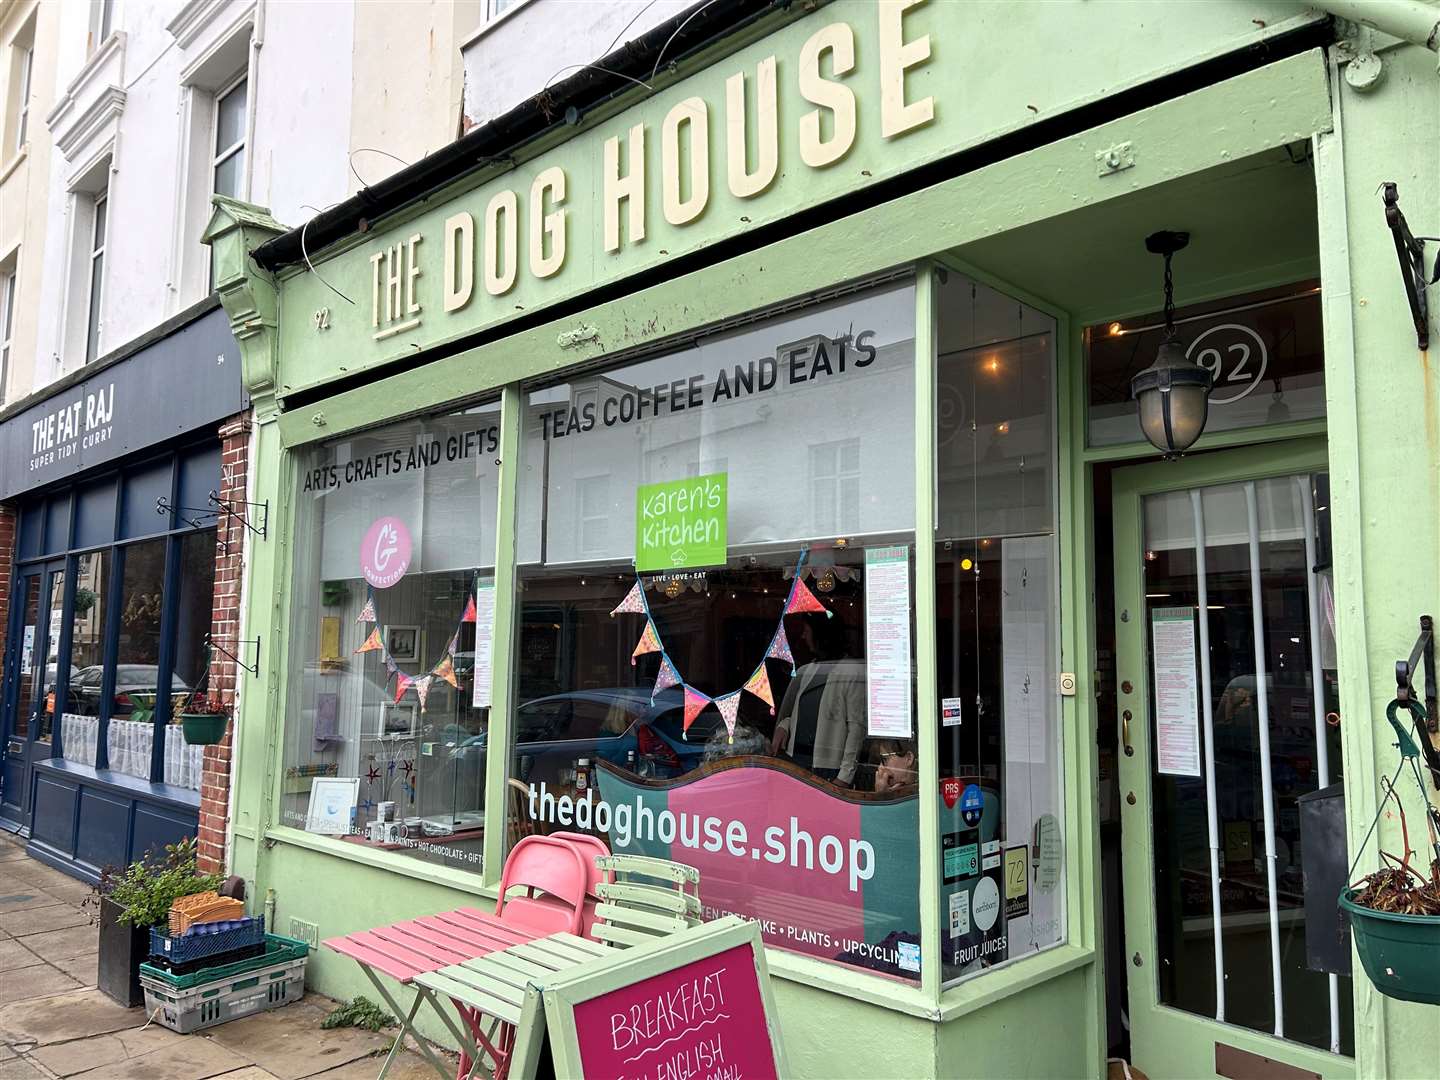 The Dog House is based in Sandgate High Street